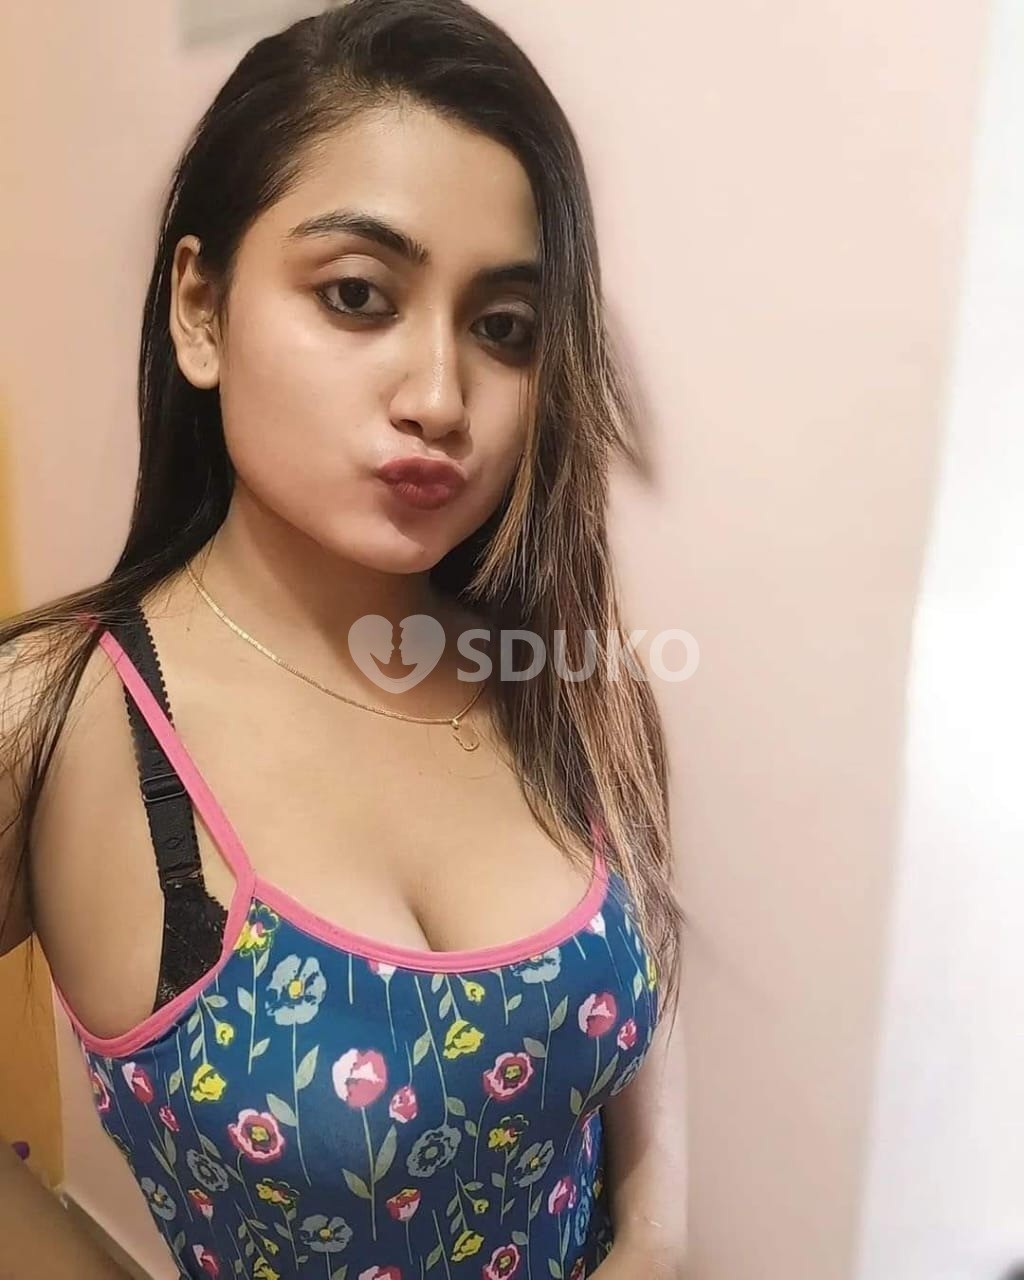 Vastrapur ❣️❣️Low price high profile college girl and aunty available any time available service genuine vip cal